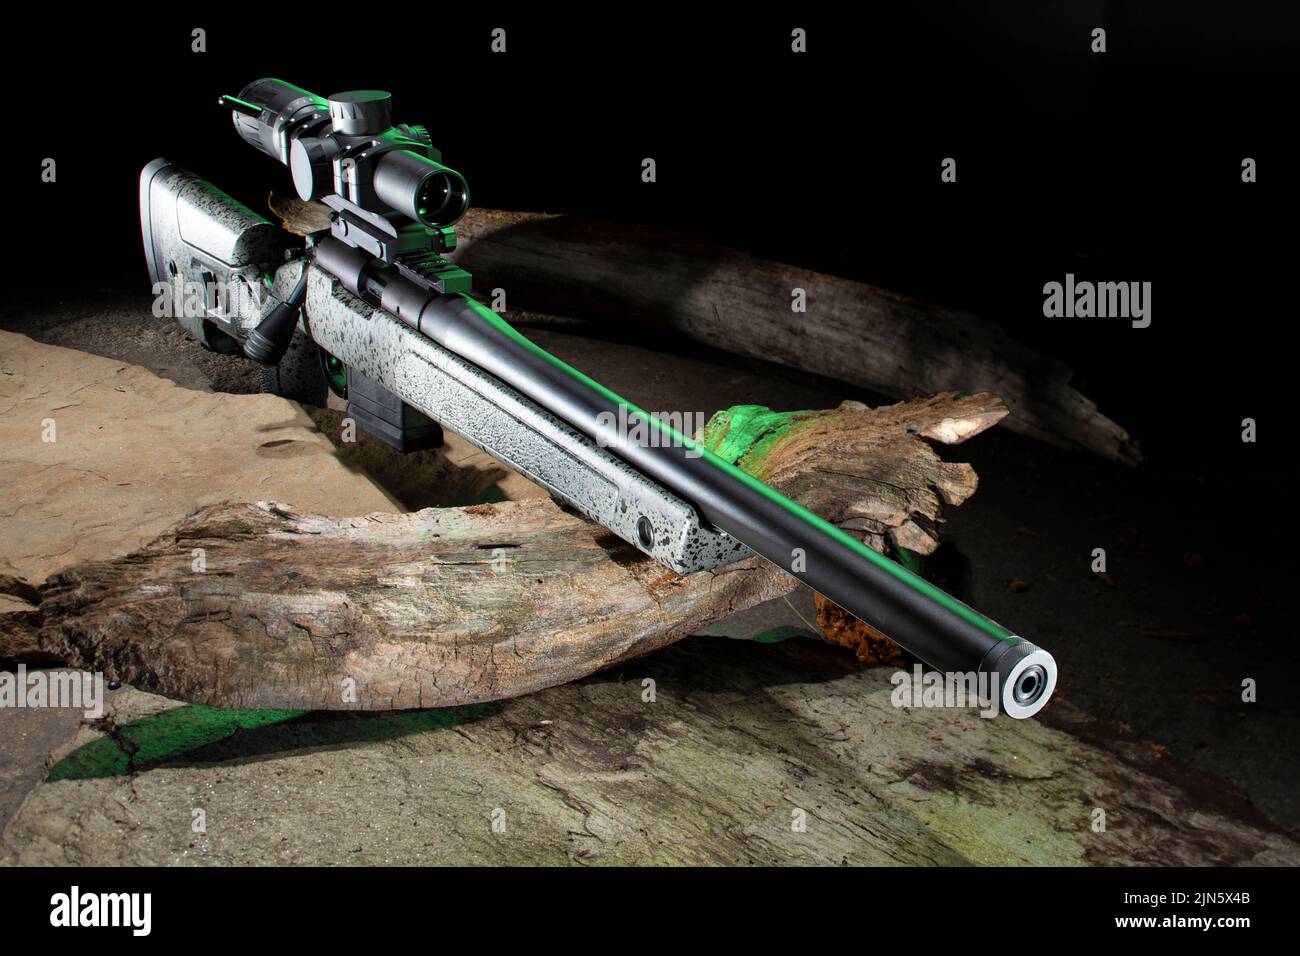 Bolt action rifle with a scope on wood and stones with green highlights Stock Photo